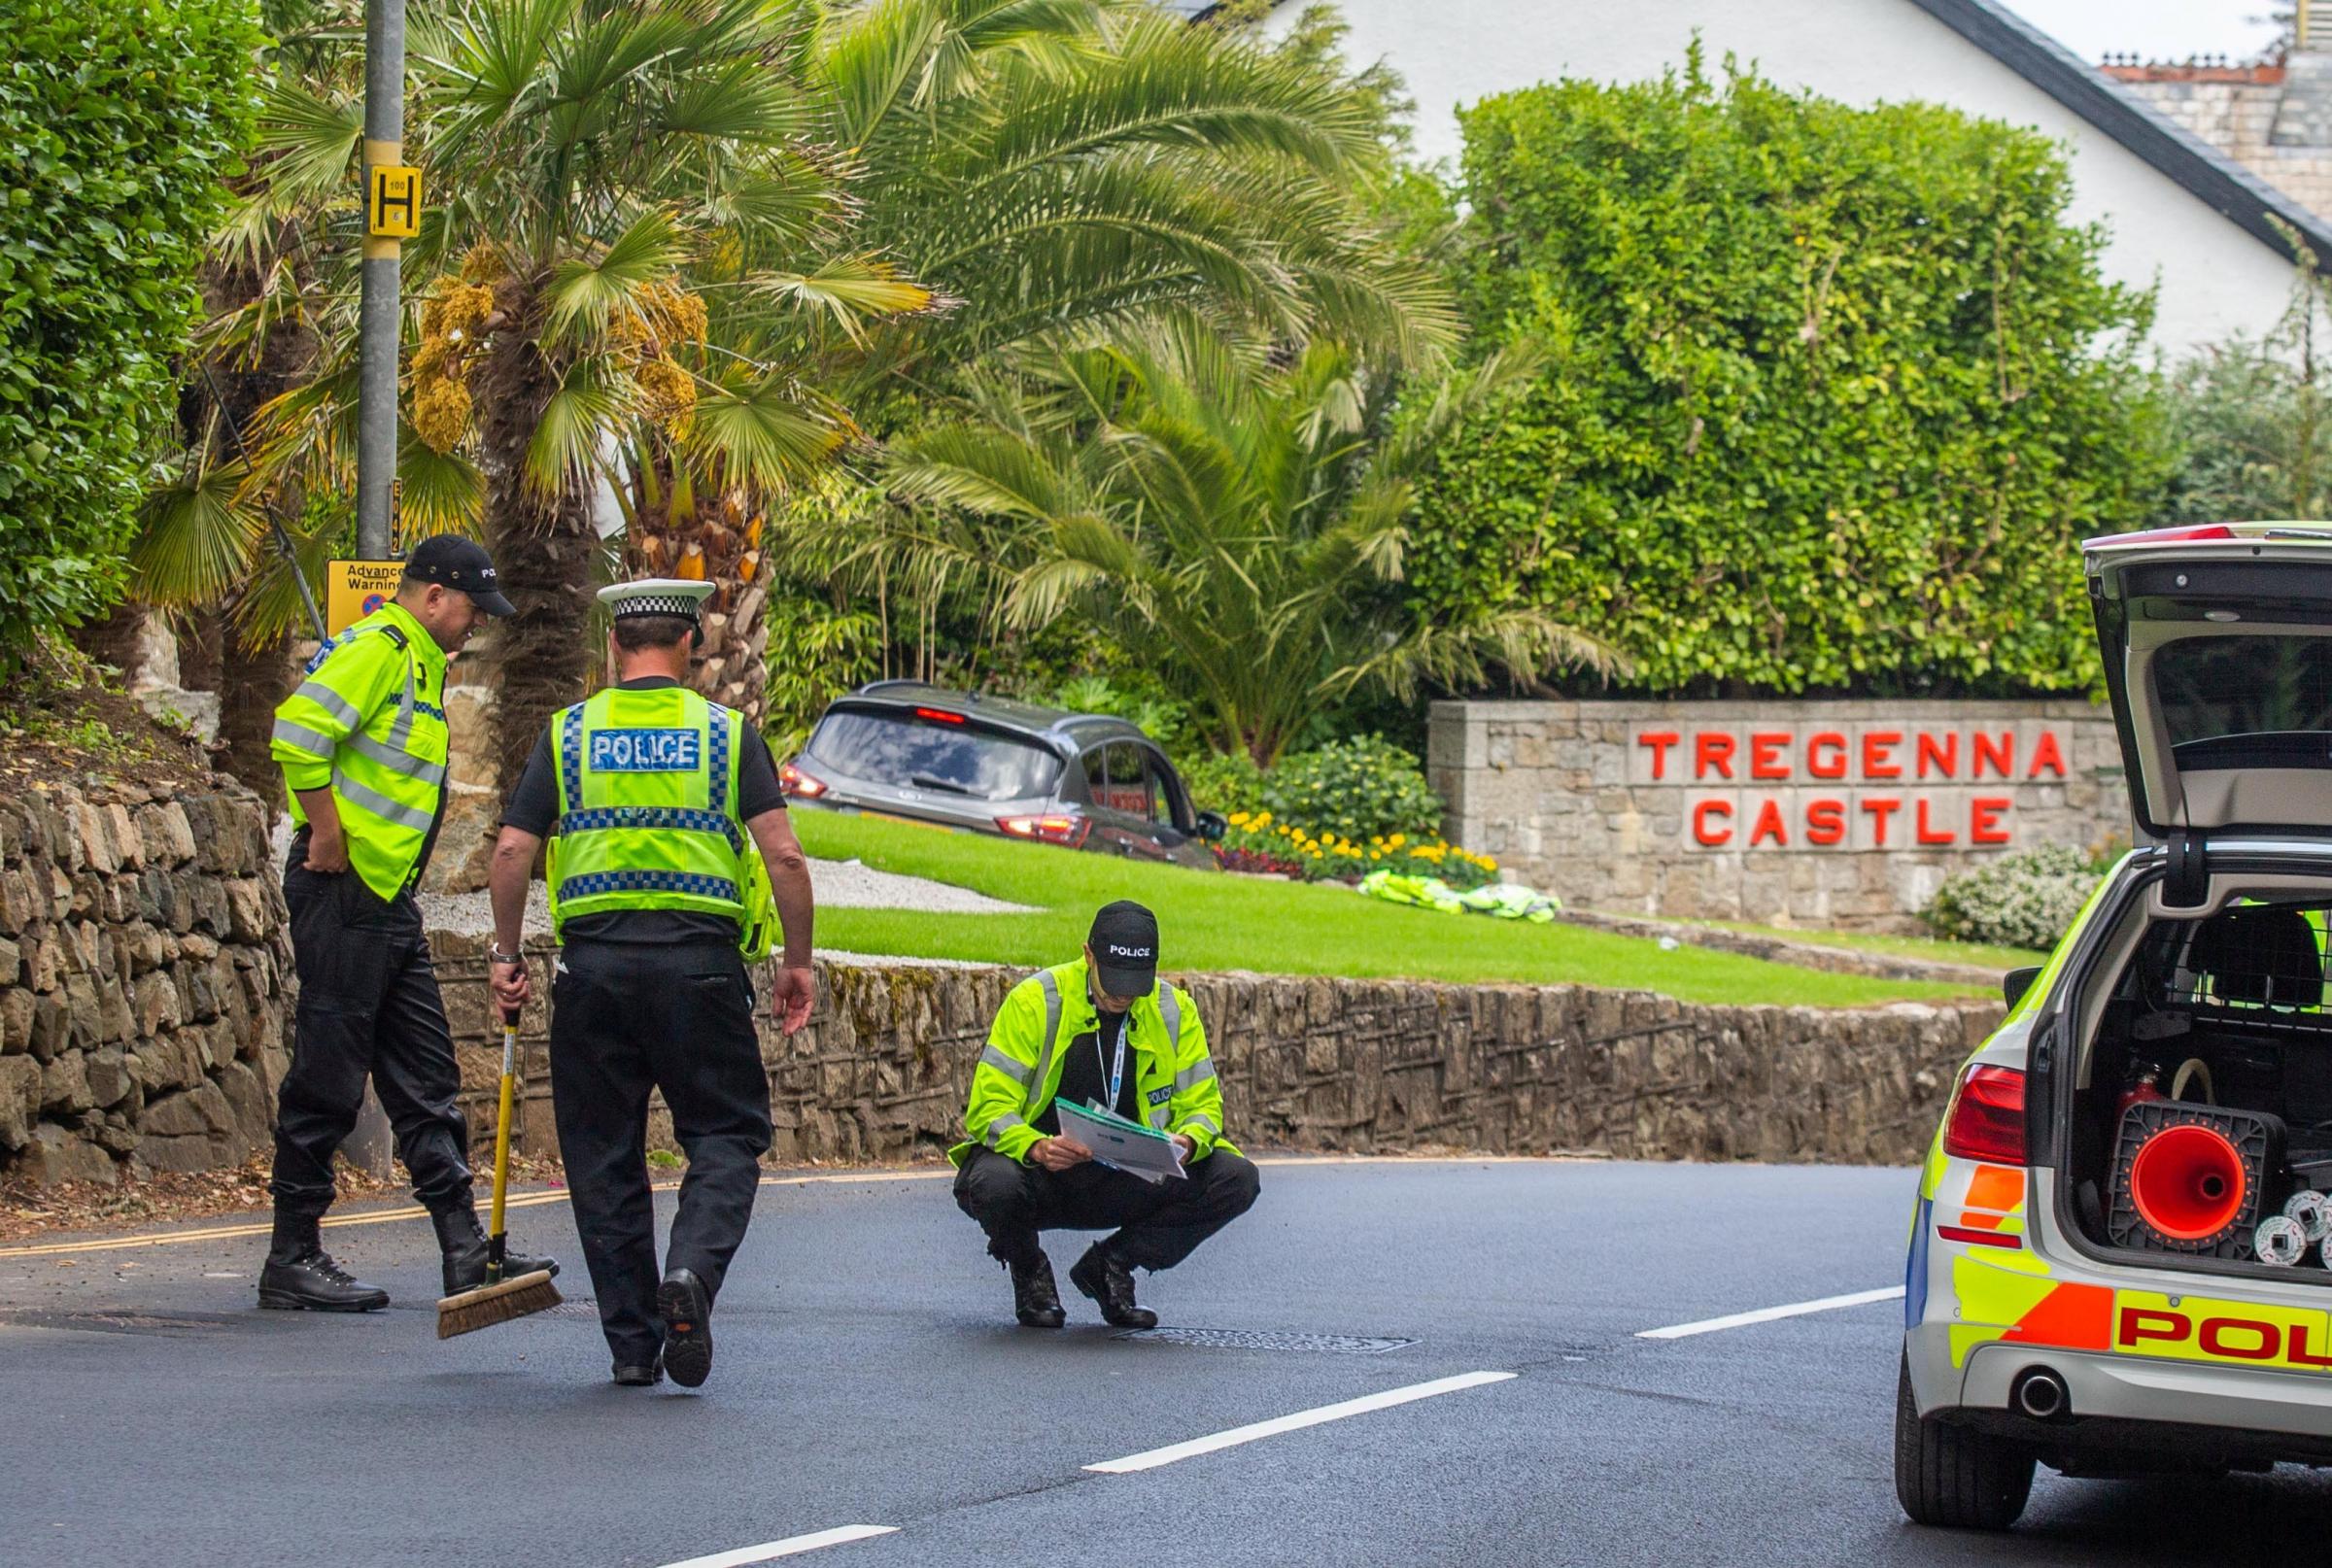 Police outside the Tregenna Castle Hotel, where the leaders will stay. Picture: SWNS